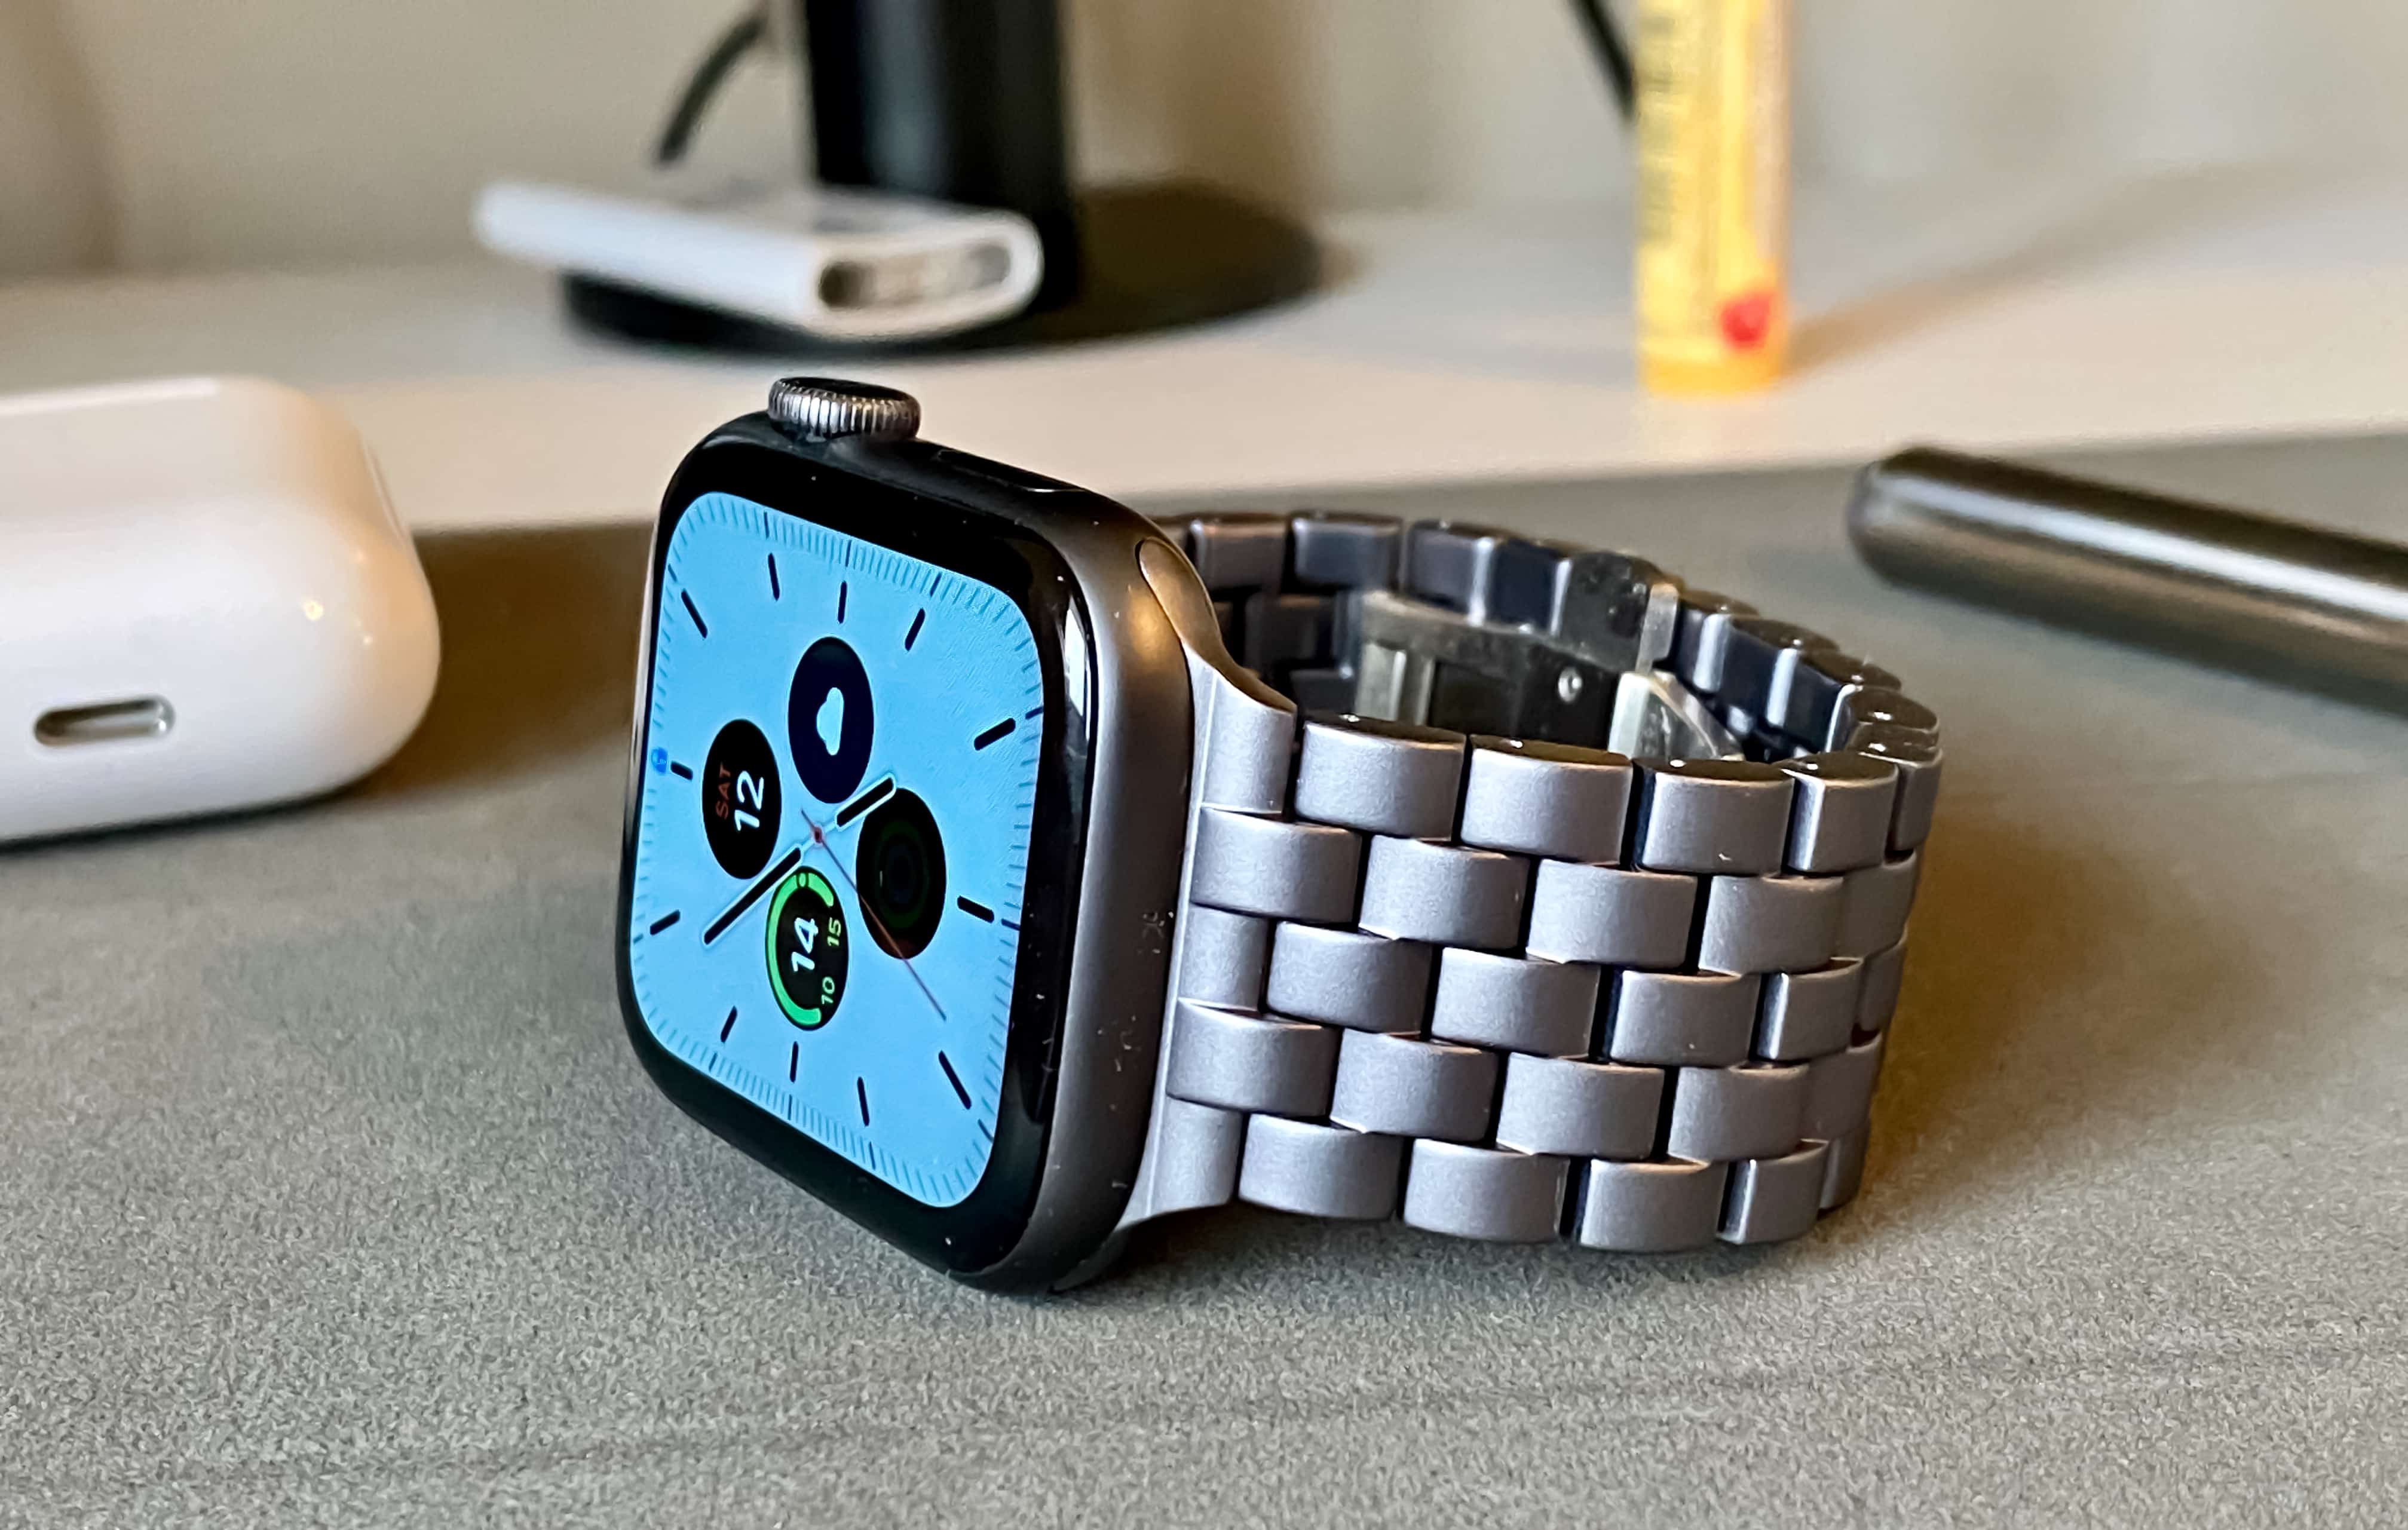 Juuk Qrono review: This lightweight aluminum Apple Watch band is machined to perfection.